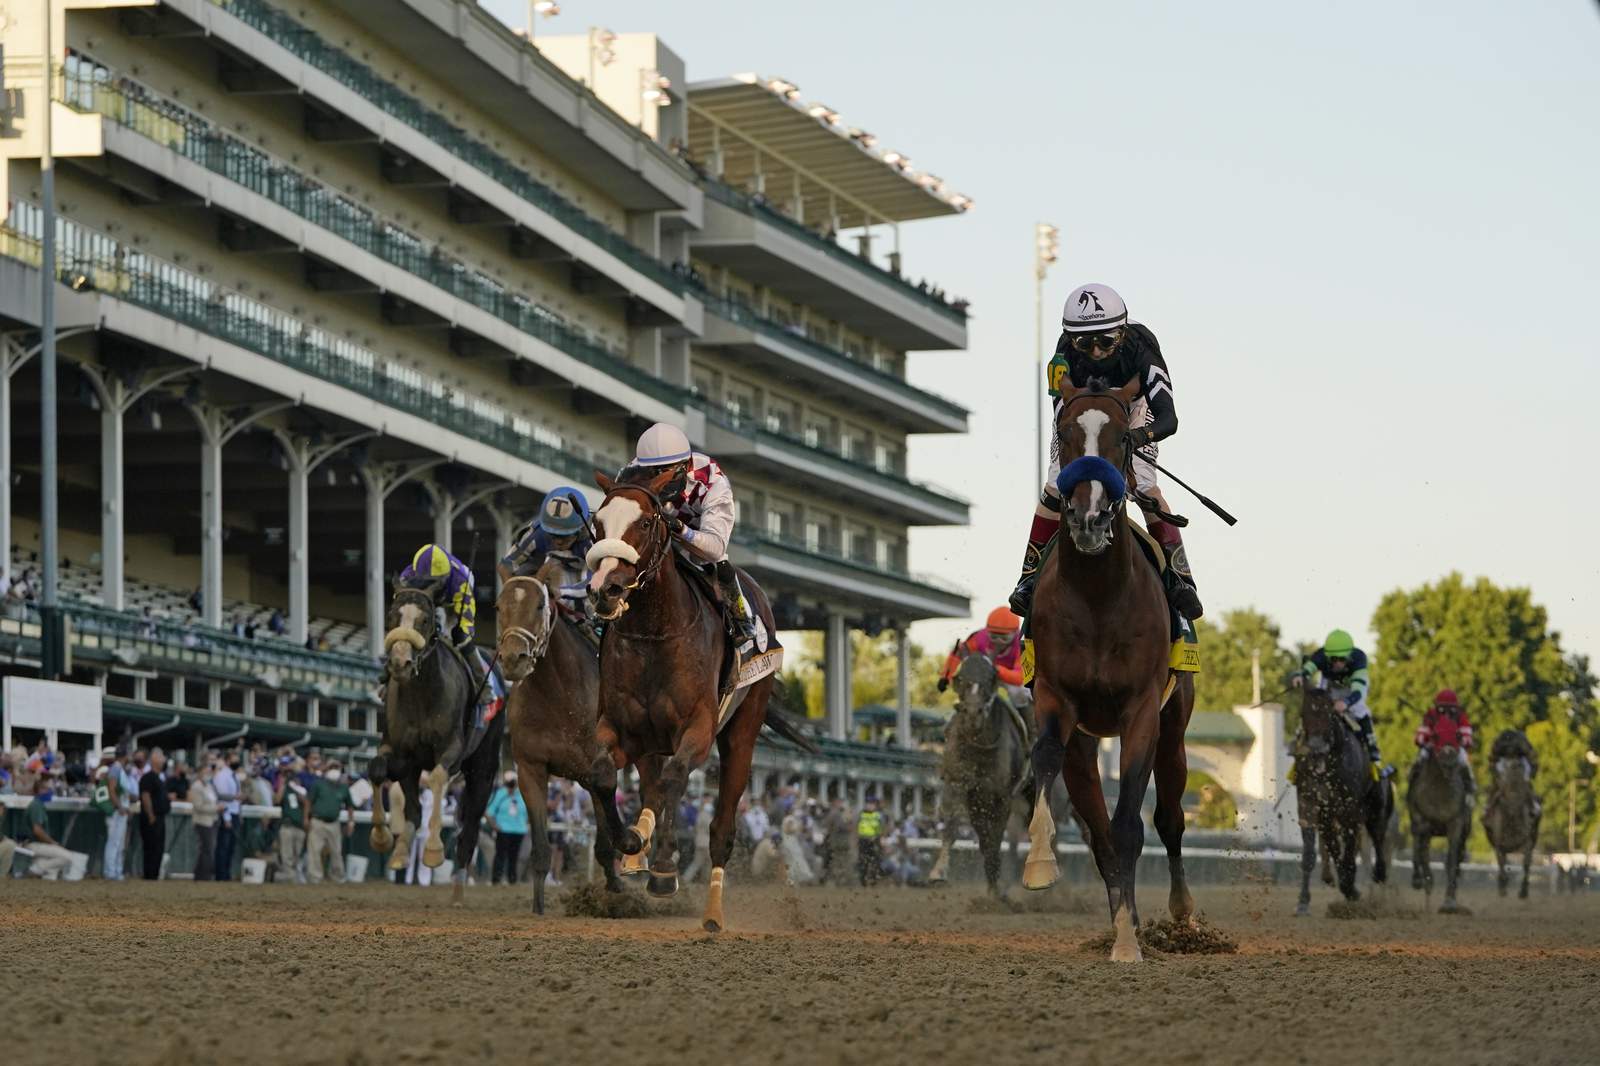 Authentic wins Ky. Derby, gives Baffert tying 6th victory